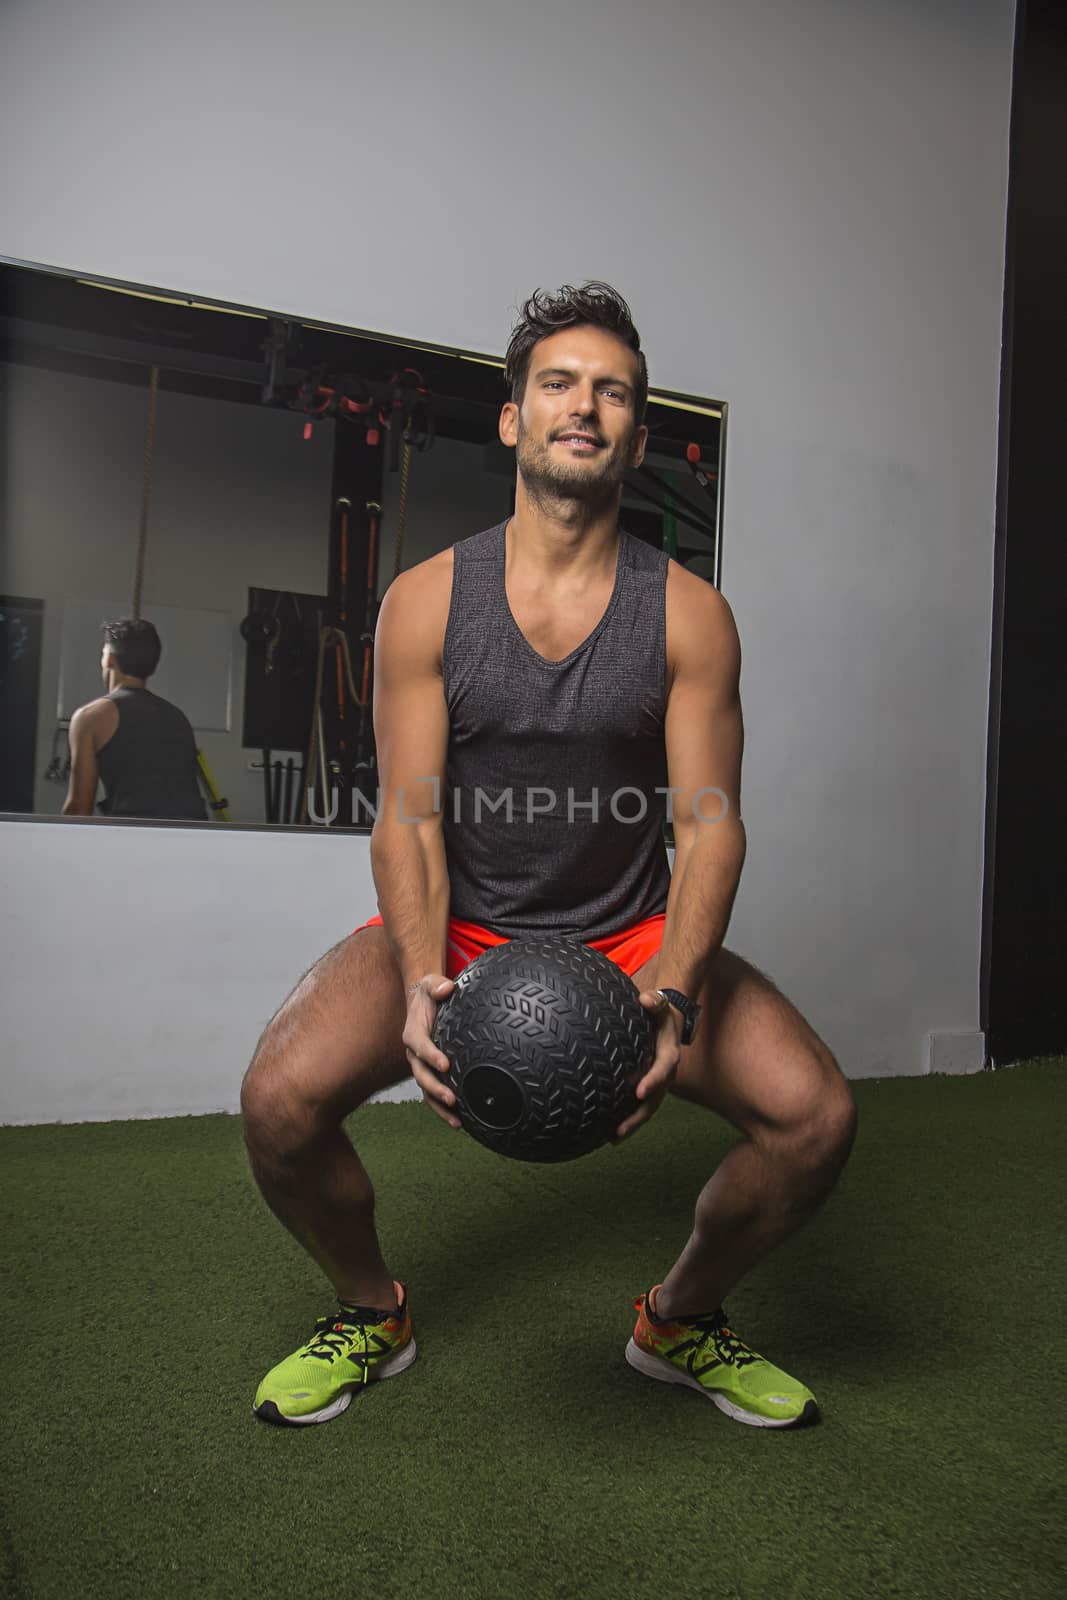 young man pulling up a black medicine ball as part of a slam ball exercise